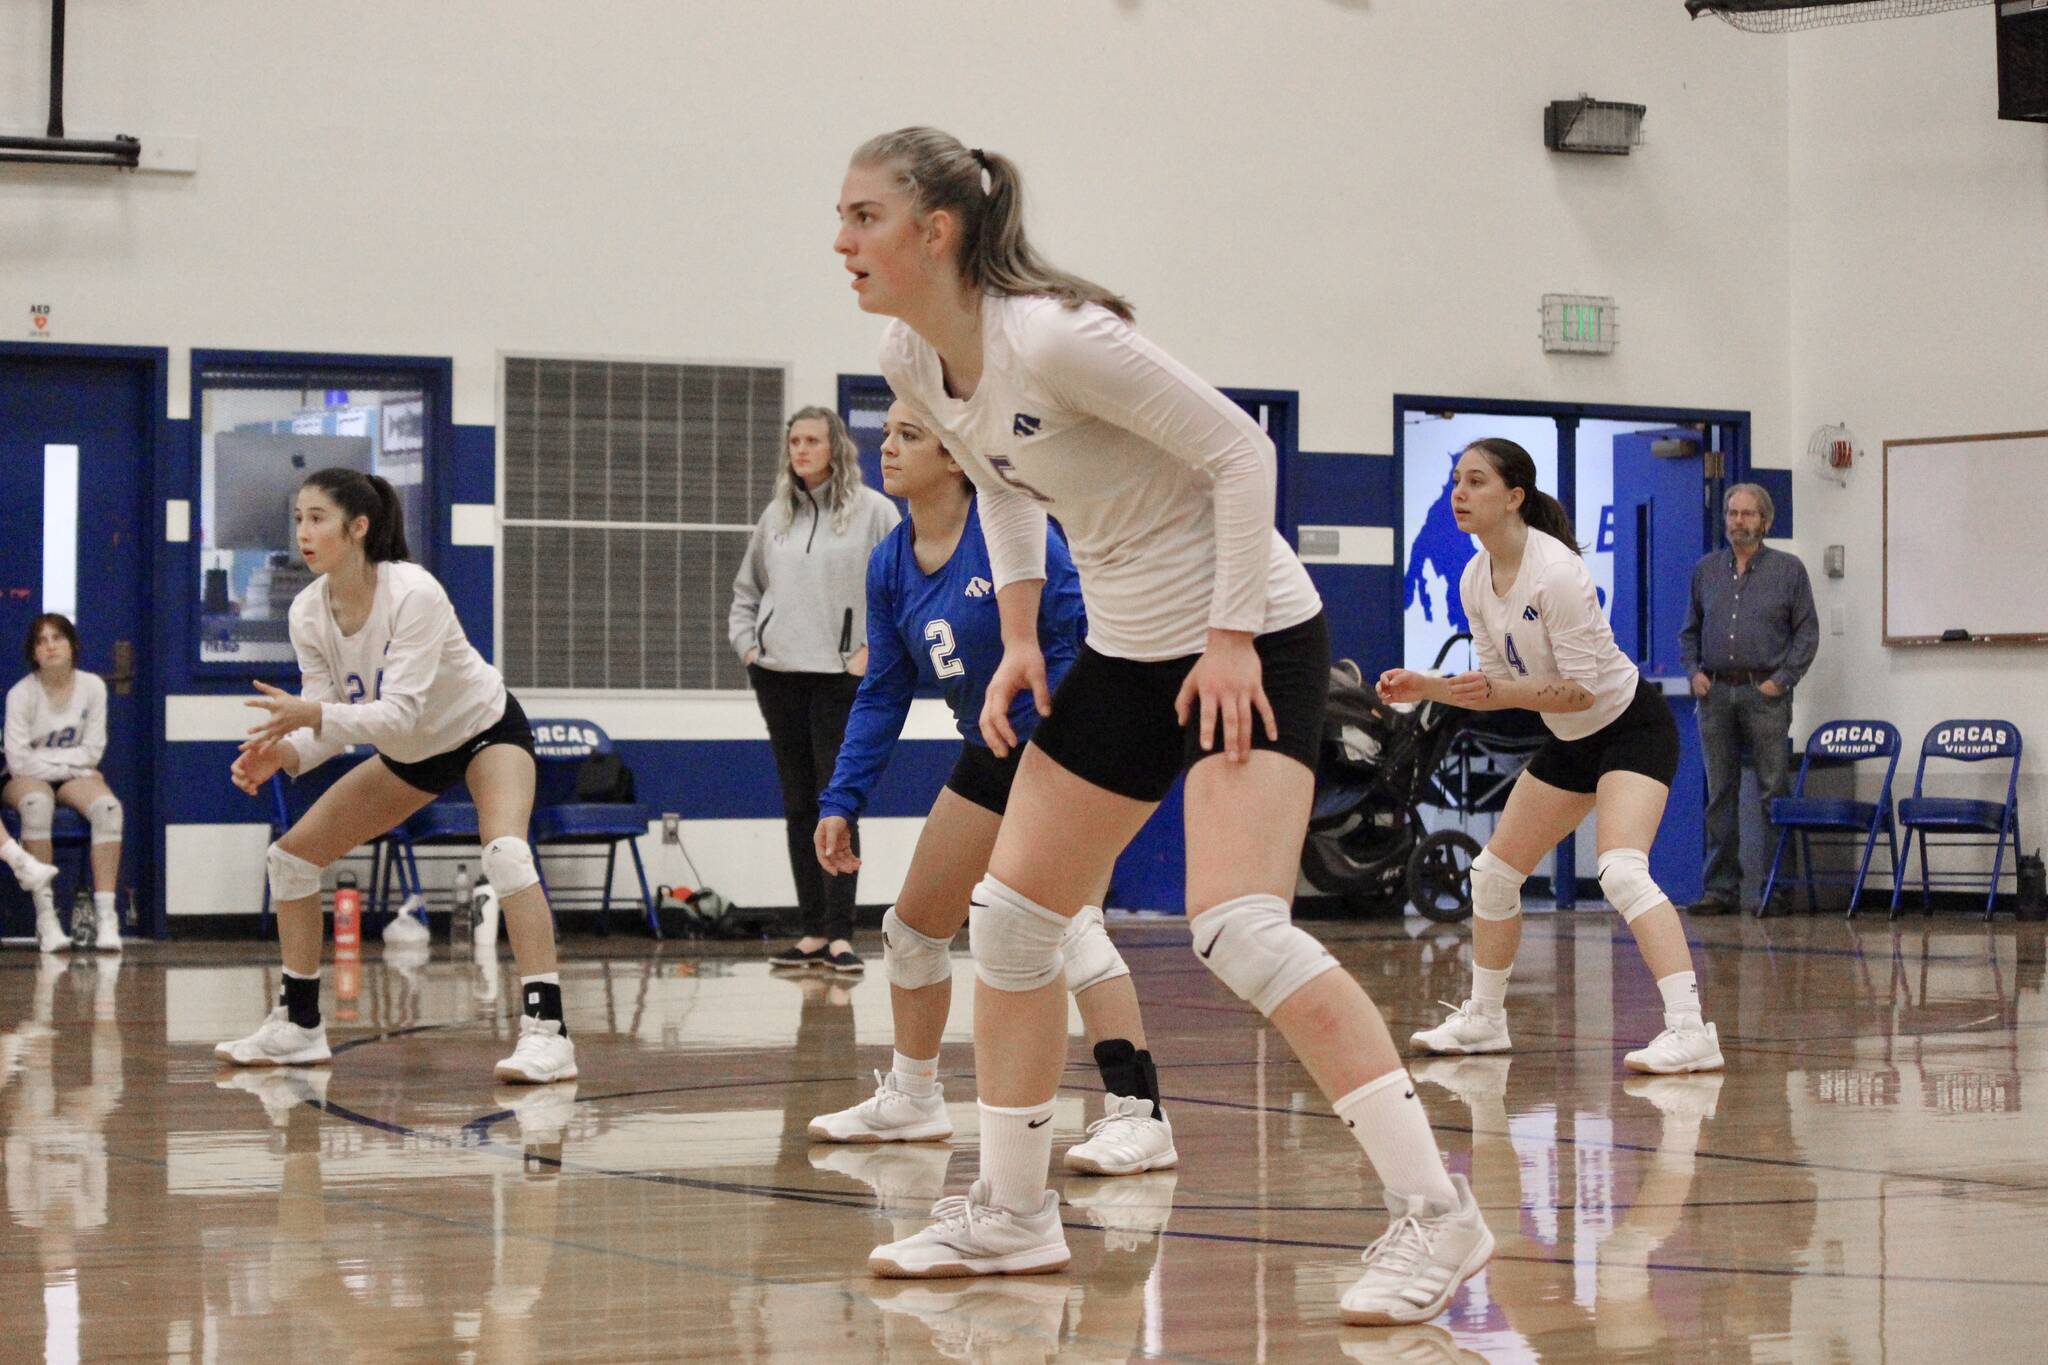 Corey Wiscomb photo
The Lady Vikings prepare to receive the serve in a game against Neah Bay in September.